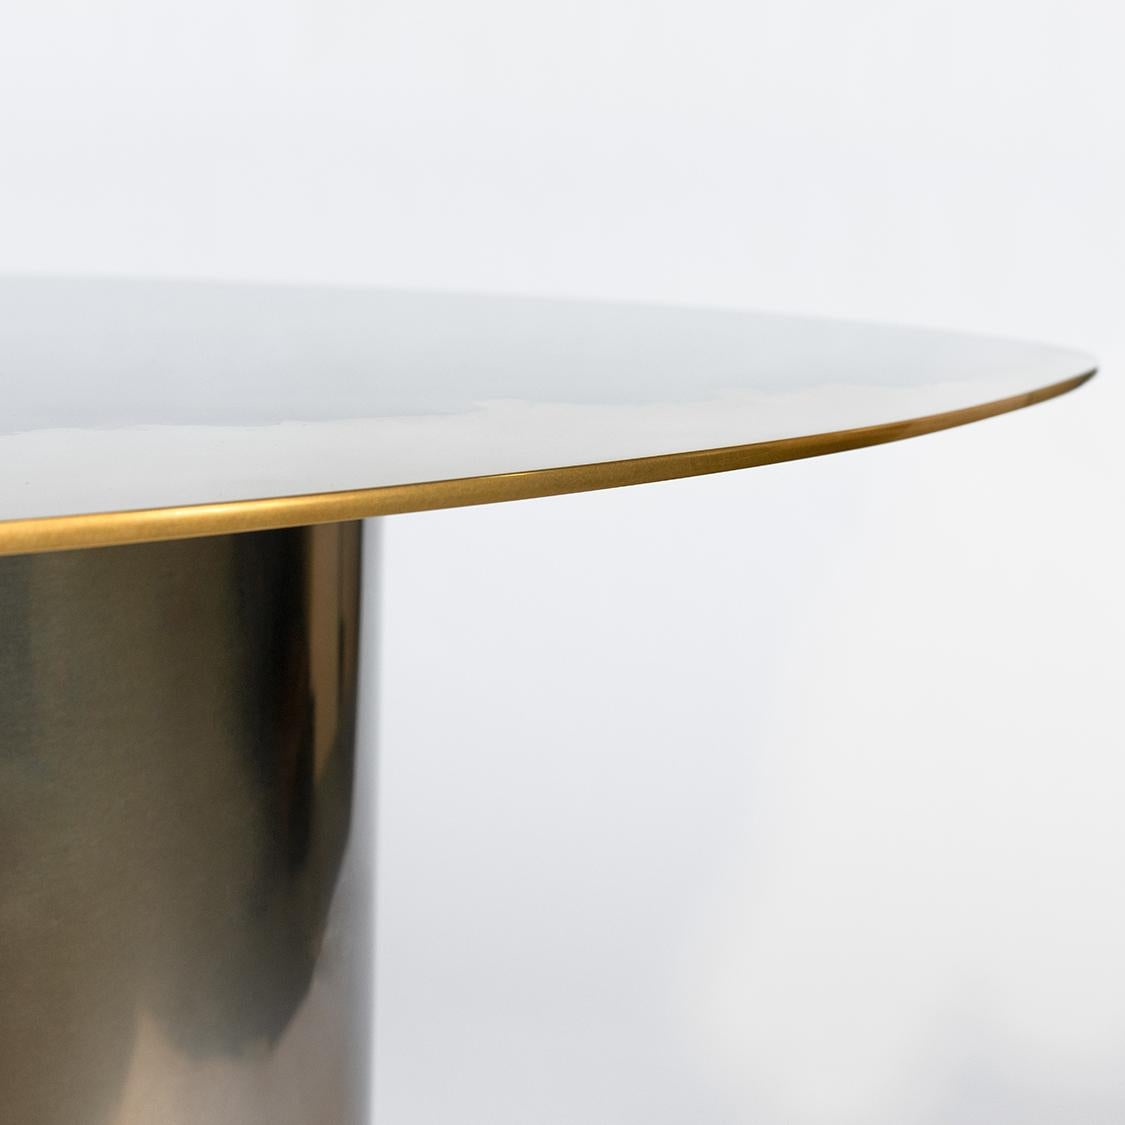 A side table as part of the Transition collection, featuring a unique, artistic mirror polished tabletop, crafted from brass and stainless steel on a tubular base. Measures: H 22”.

Studio Warm has developed a distinctive, high-end, artistic finish